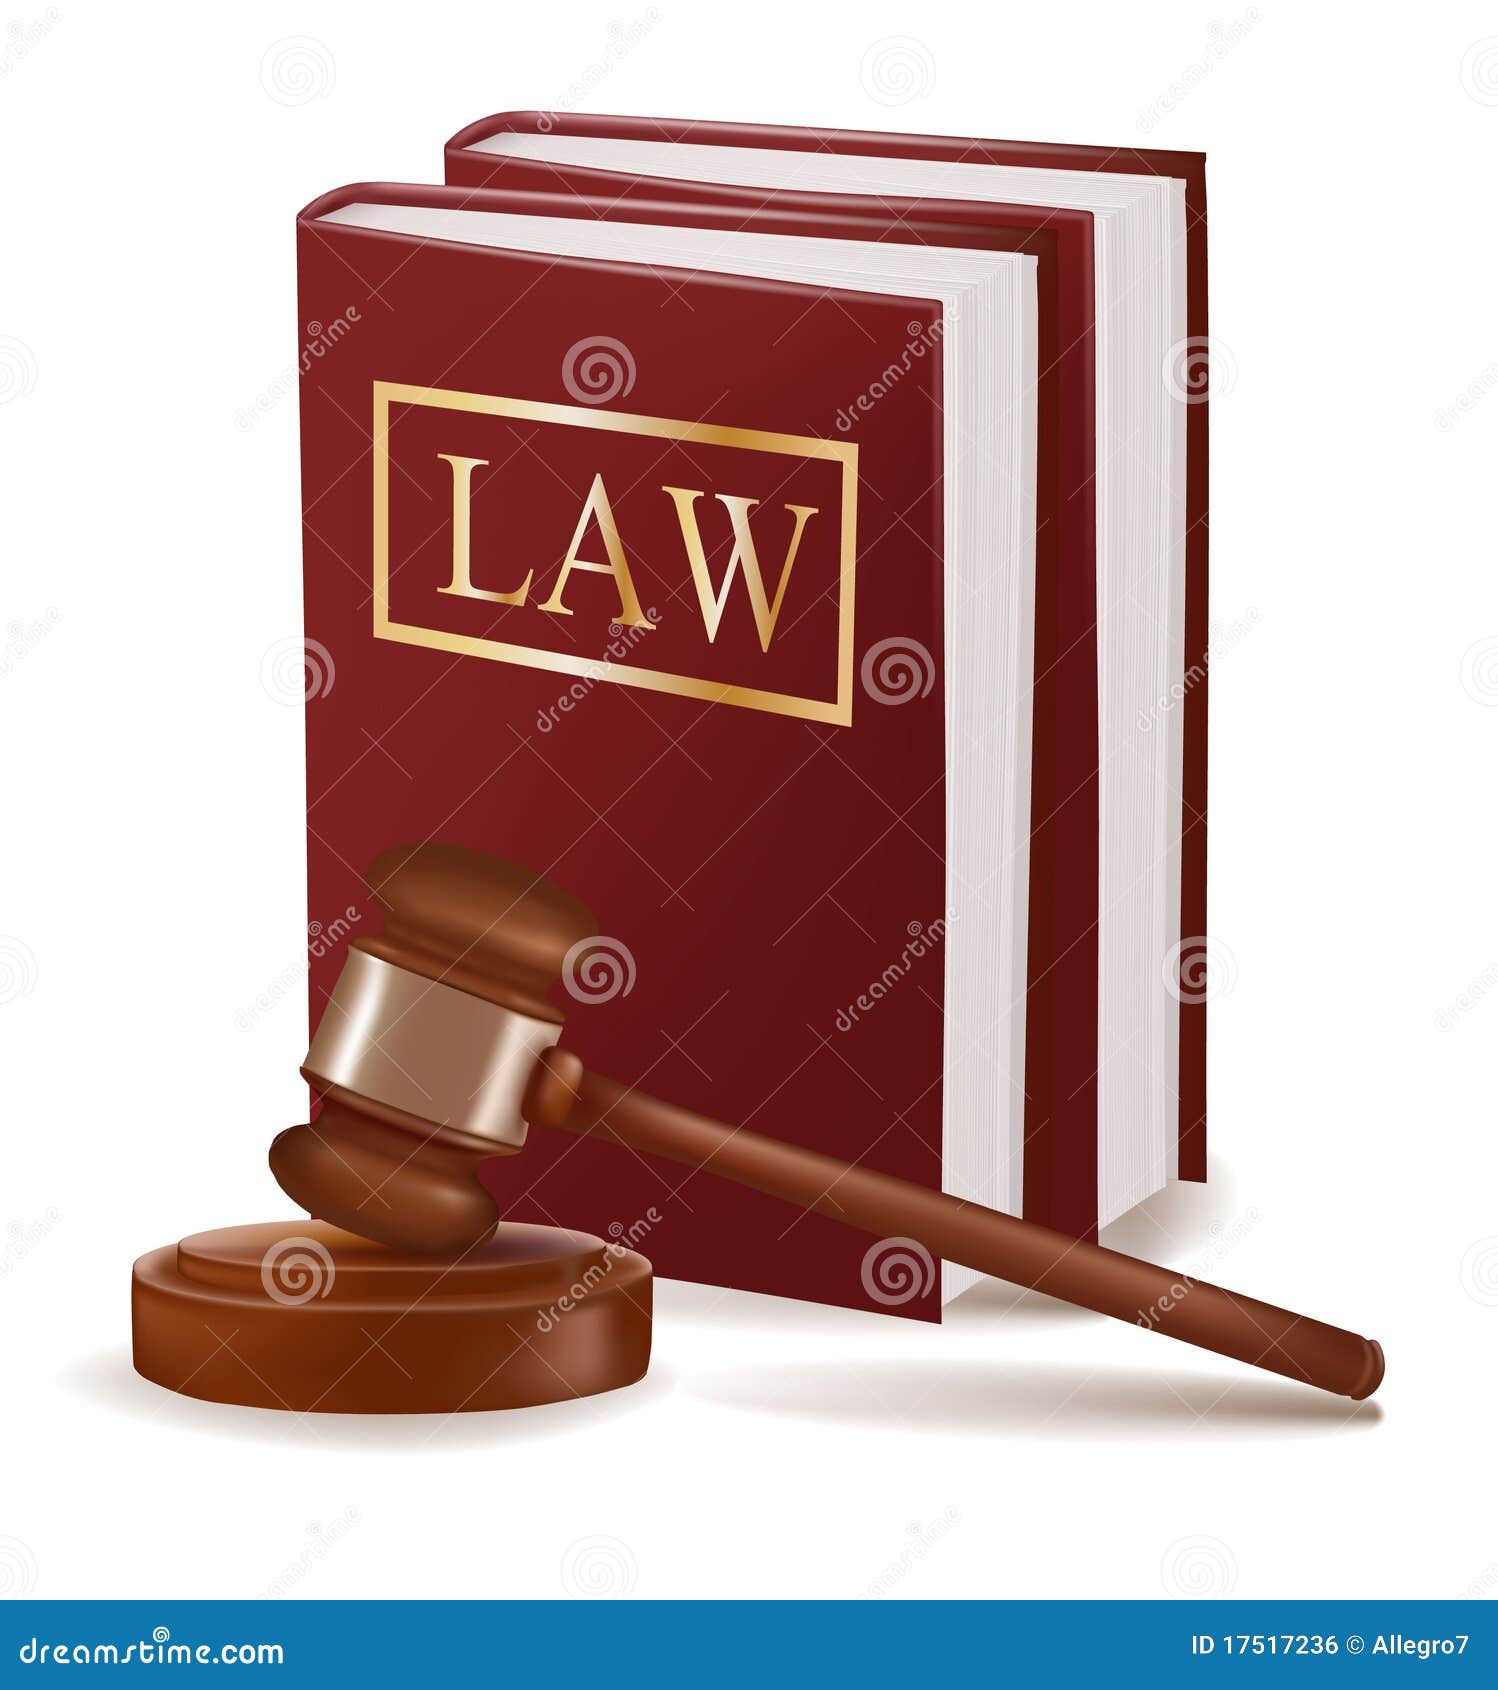 law book clipart - photo #10